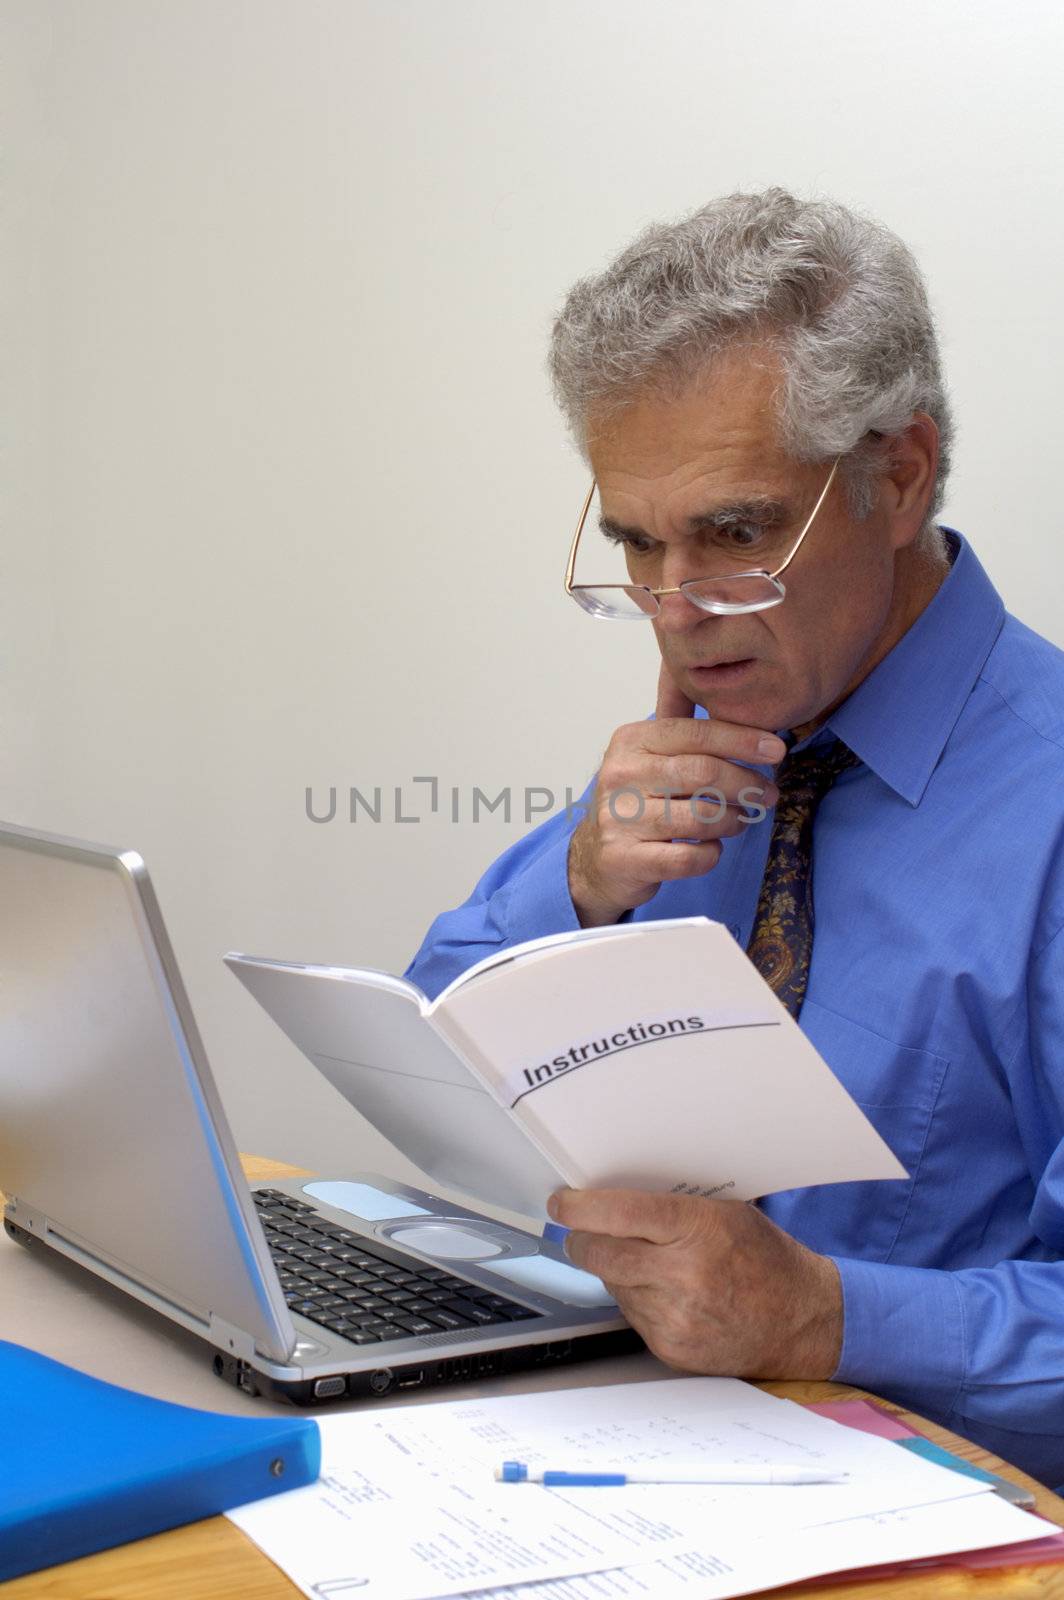 An older businessman gazes in puzzlement at the instructions for his laptop computer, with a hint of worry on his face.